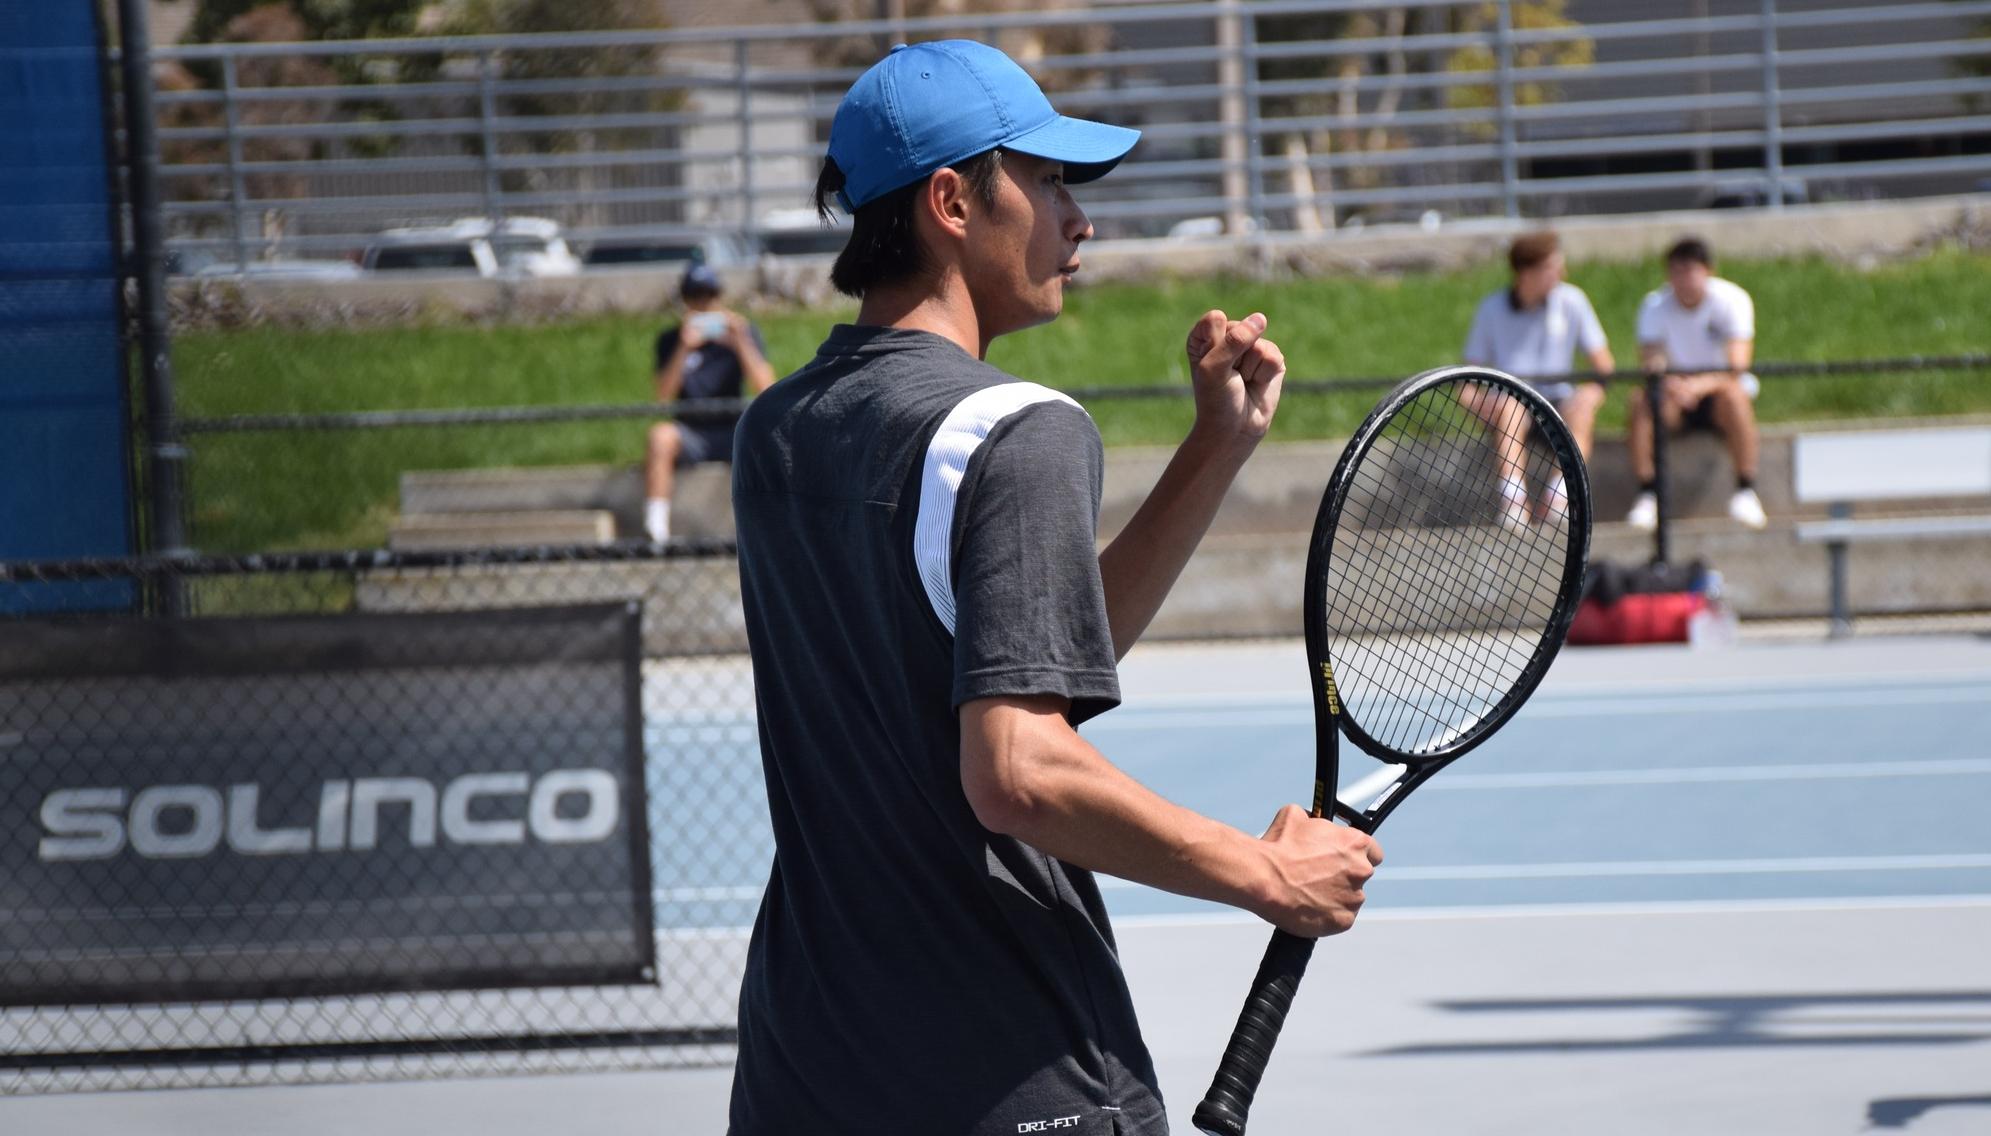 Three men's doubles teams, Ishida in singles move on at state